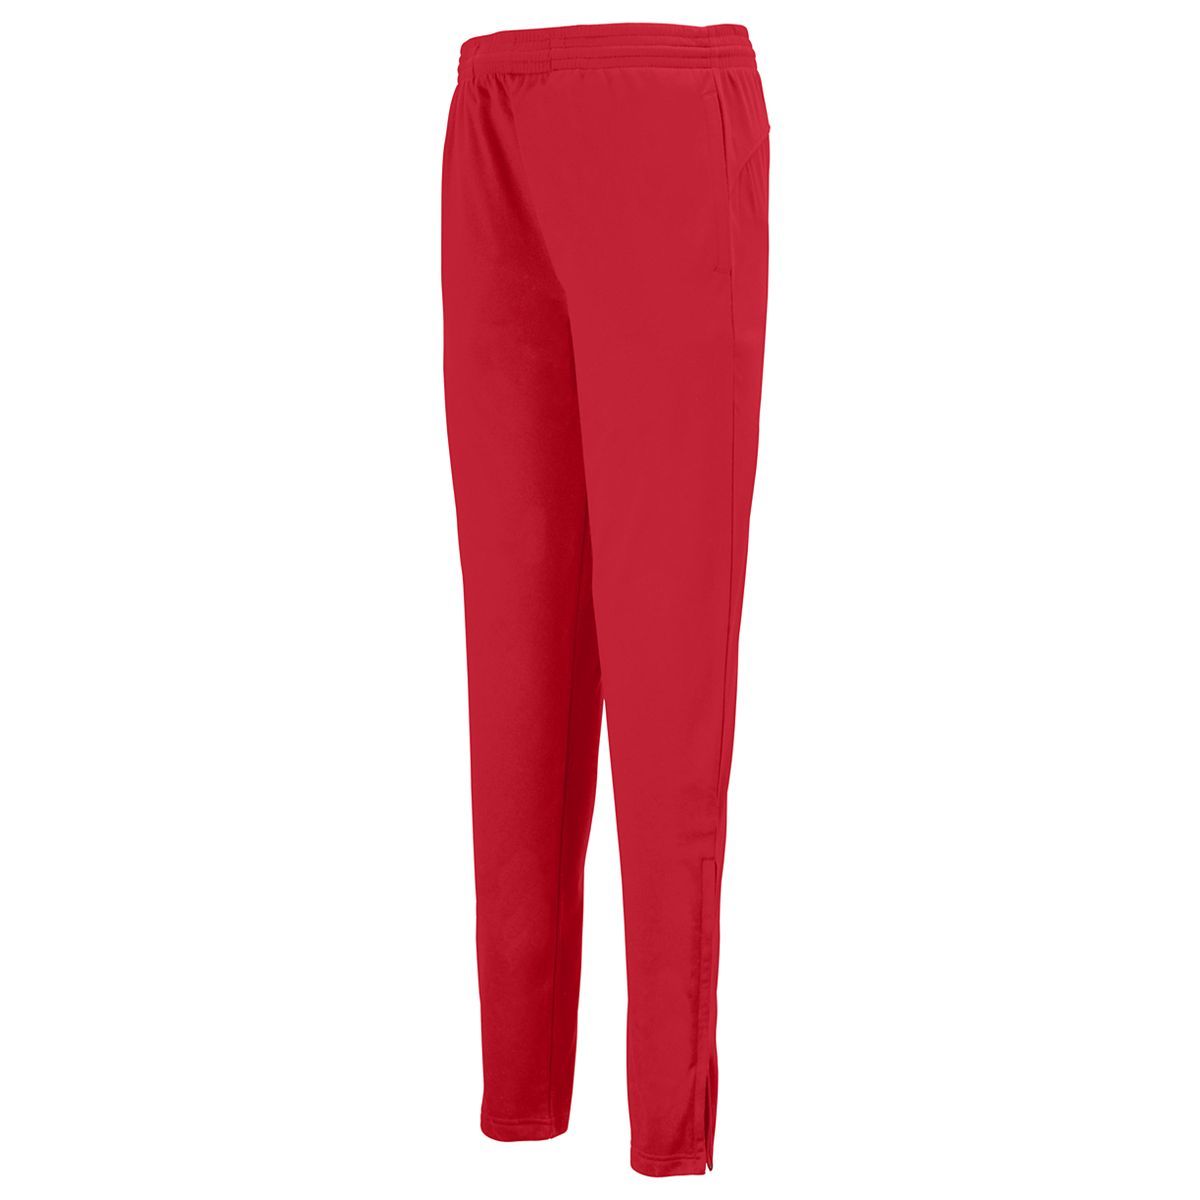 Augusta Sportswear Tapered Leg Pant in Red  -Part of the Adult, Adult-Pants, Pants, Augusta-Products product lines at KanaleyCreations.com